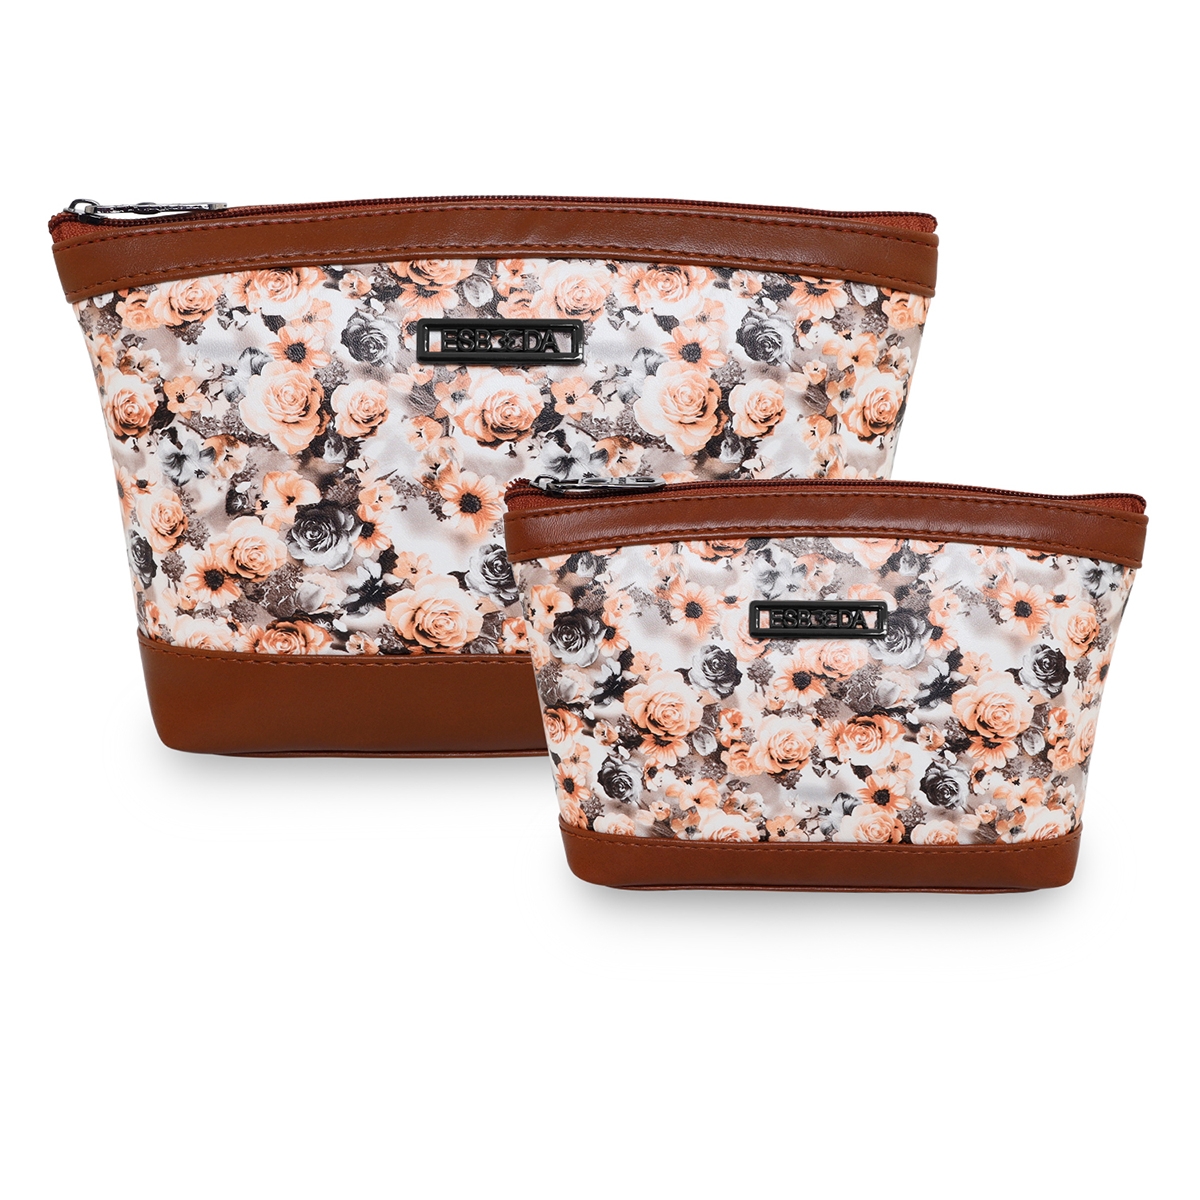 ESBEDA | ESBEDA Tan Color Floral Print Pouch For Women Pack of 2 0